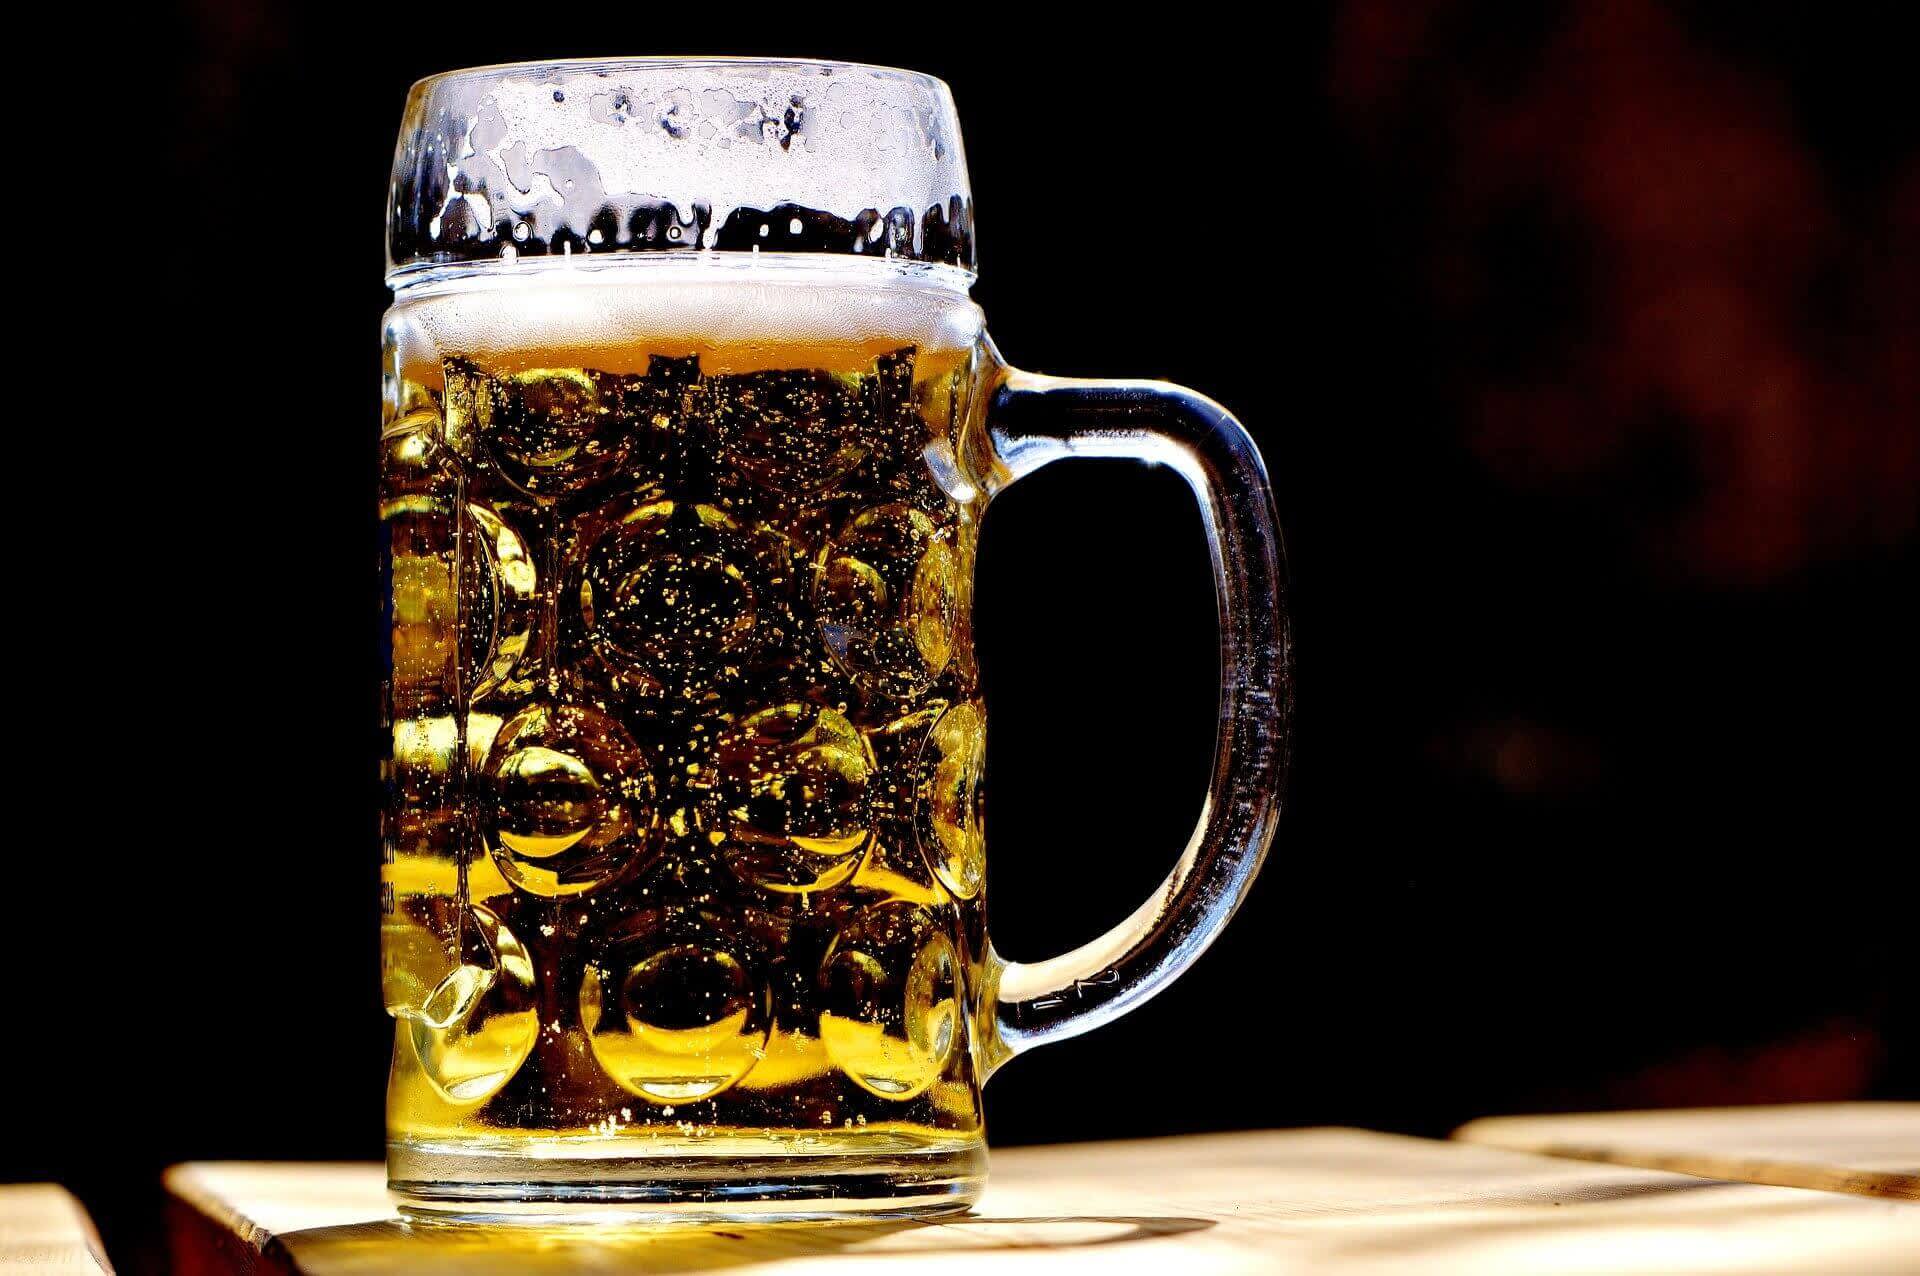 Beer mug with foam on table over black background